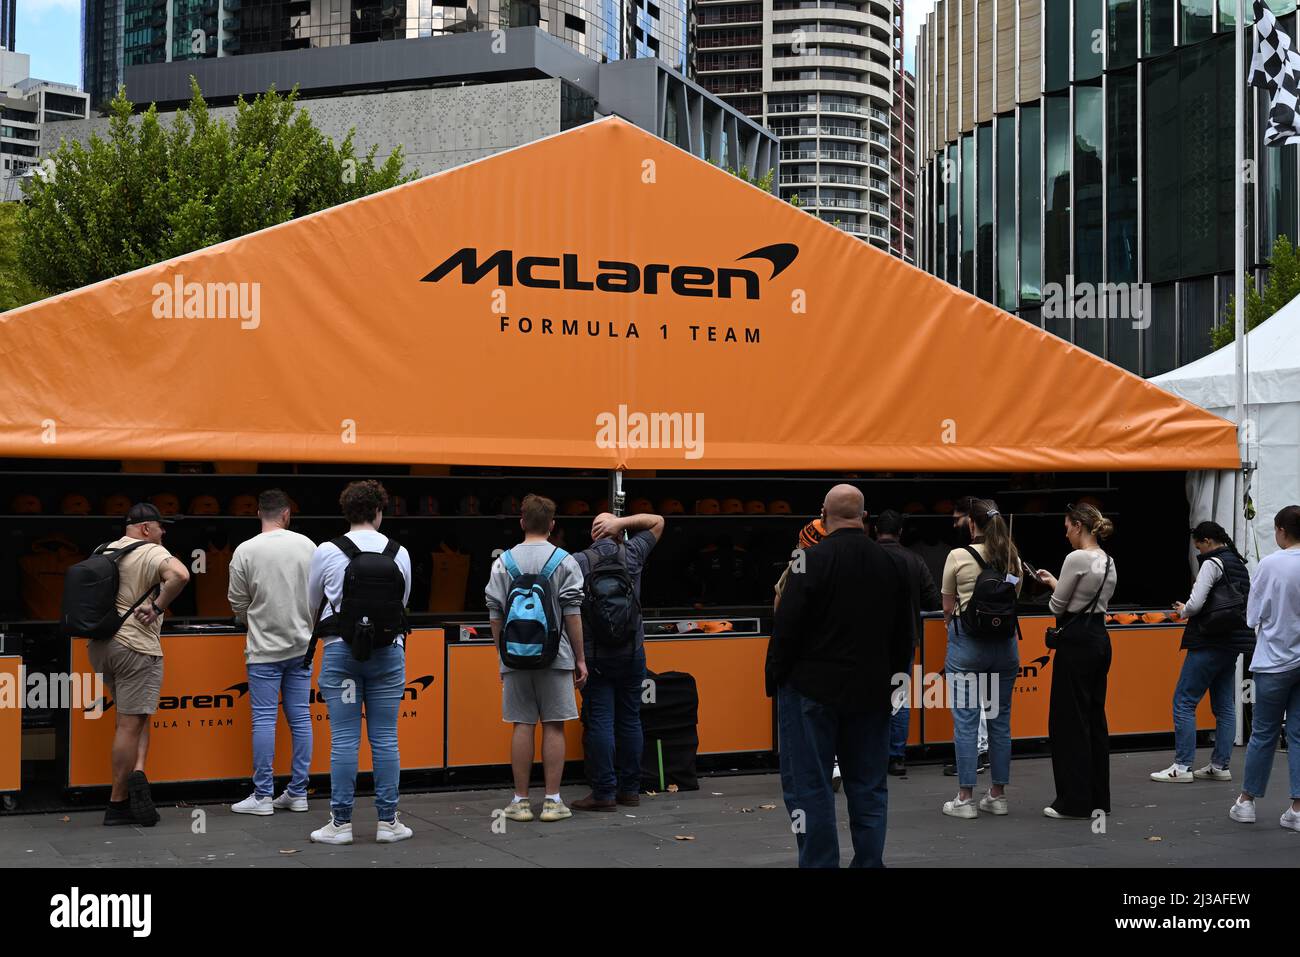 McLaren Formula 1 Team merchandise stall in Melbourne, with fans queueing to purchase team gear before the start of the Grand Prix weekend Stock Photo